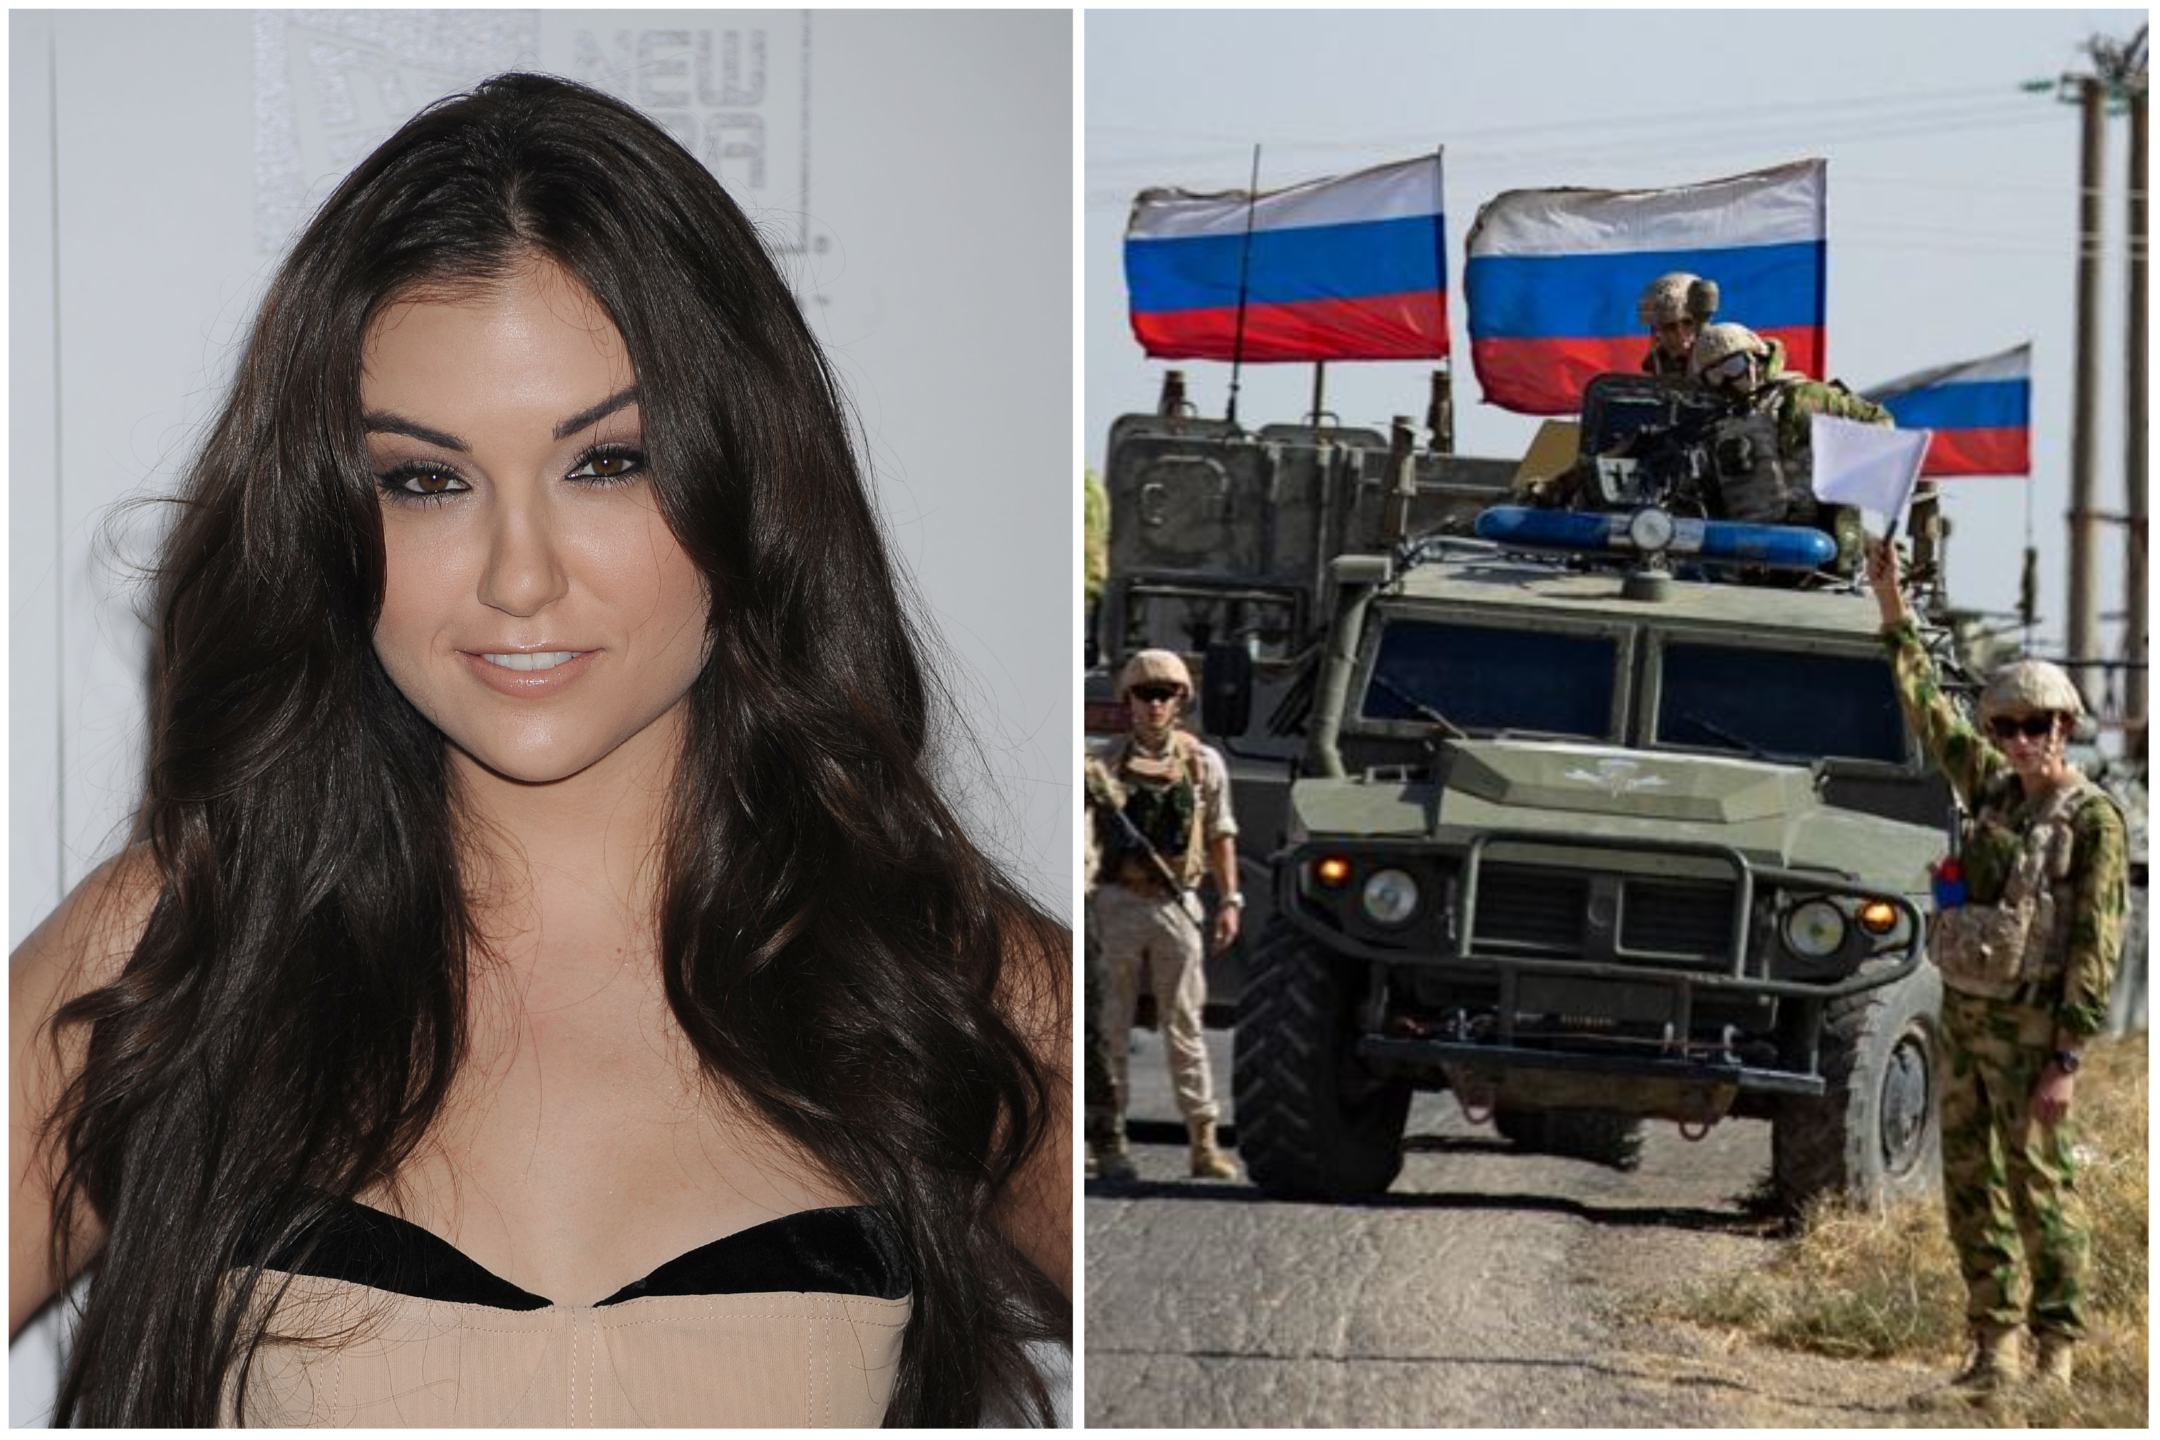 Fact Check Was Ex-Adult Film Star Sasha Grey in Russian Military Promo? image picture